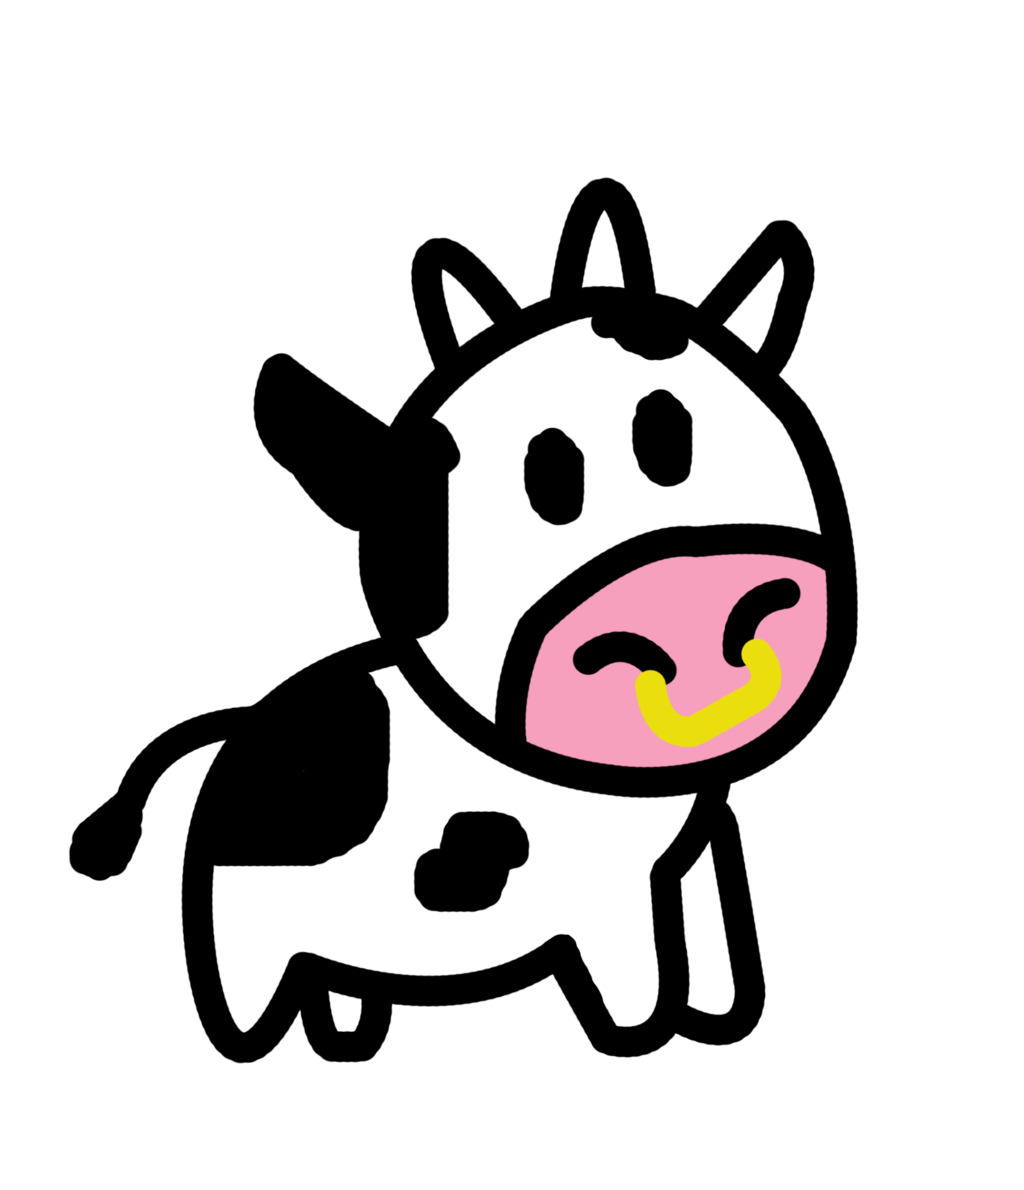 Gallery Animated Cow